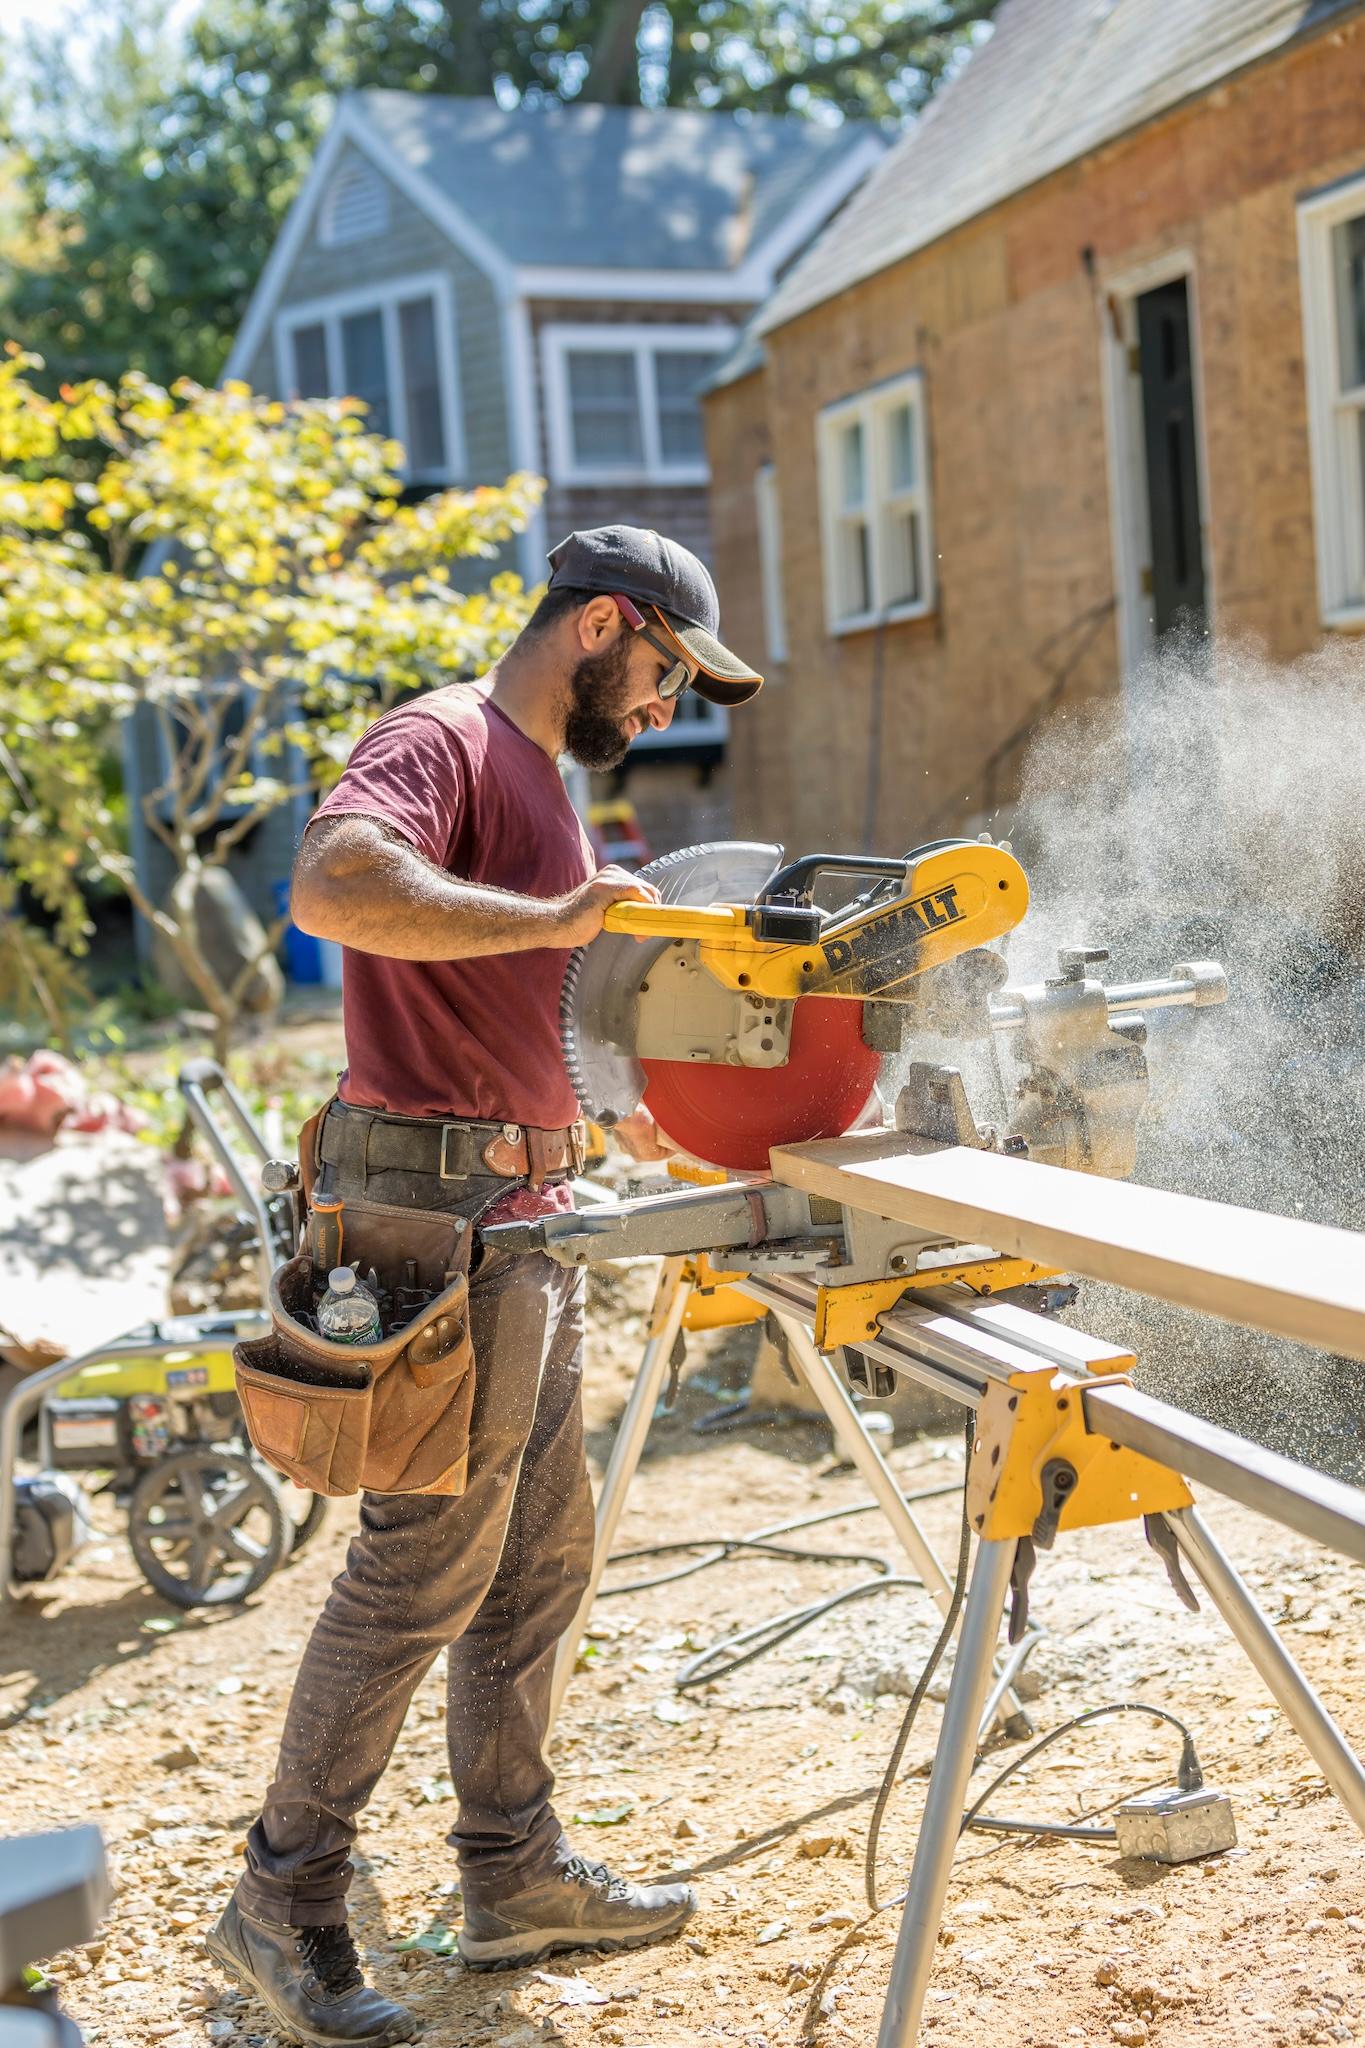 Tekton worker using a chop saw to cut a 2x6 board to length